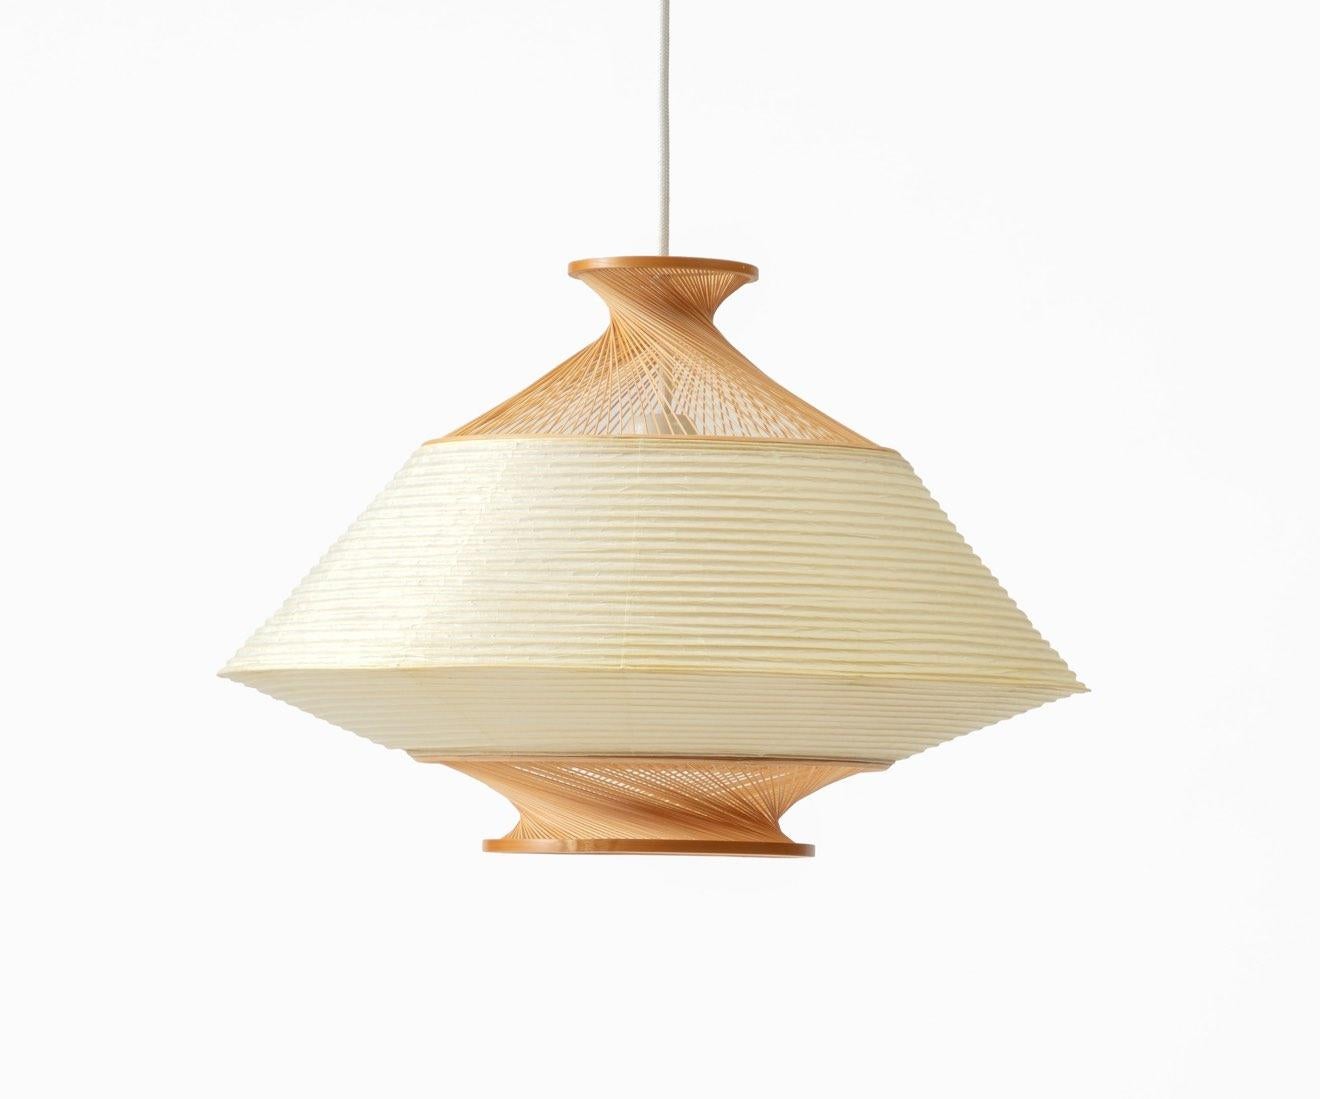 The RON pendant combines the bamboo craftsmanship of the artist with the softness and warmth of the paper shade.

A unique feature is that the paper shade can be turned upside down and change the expression of the lamp.

Often paper lamps are